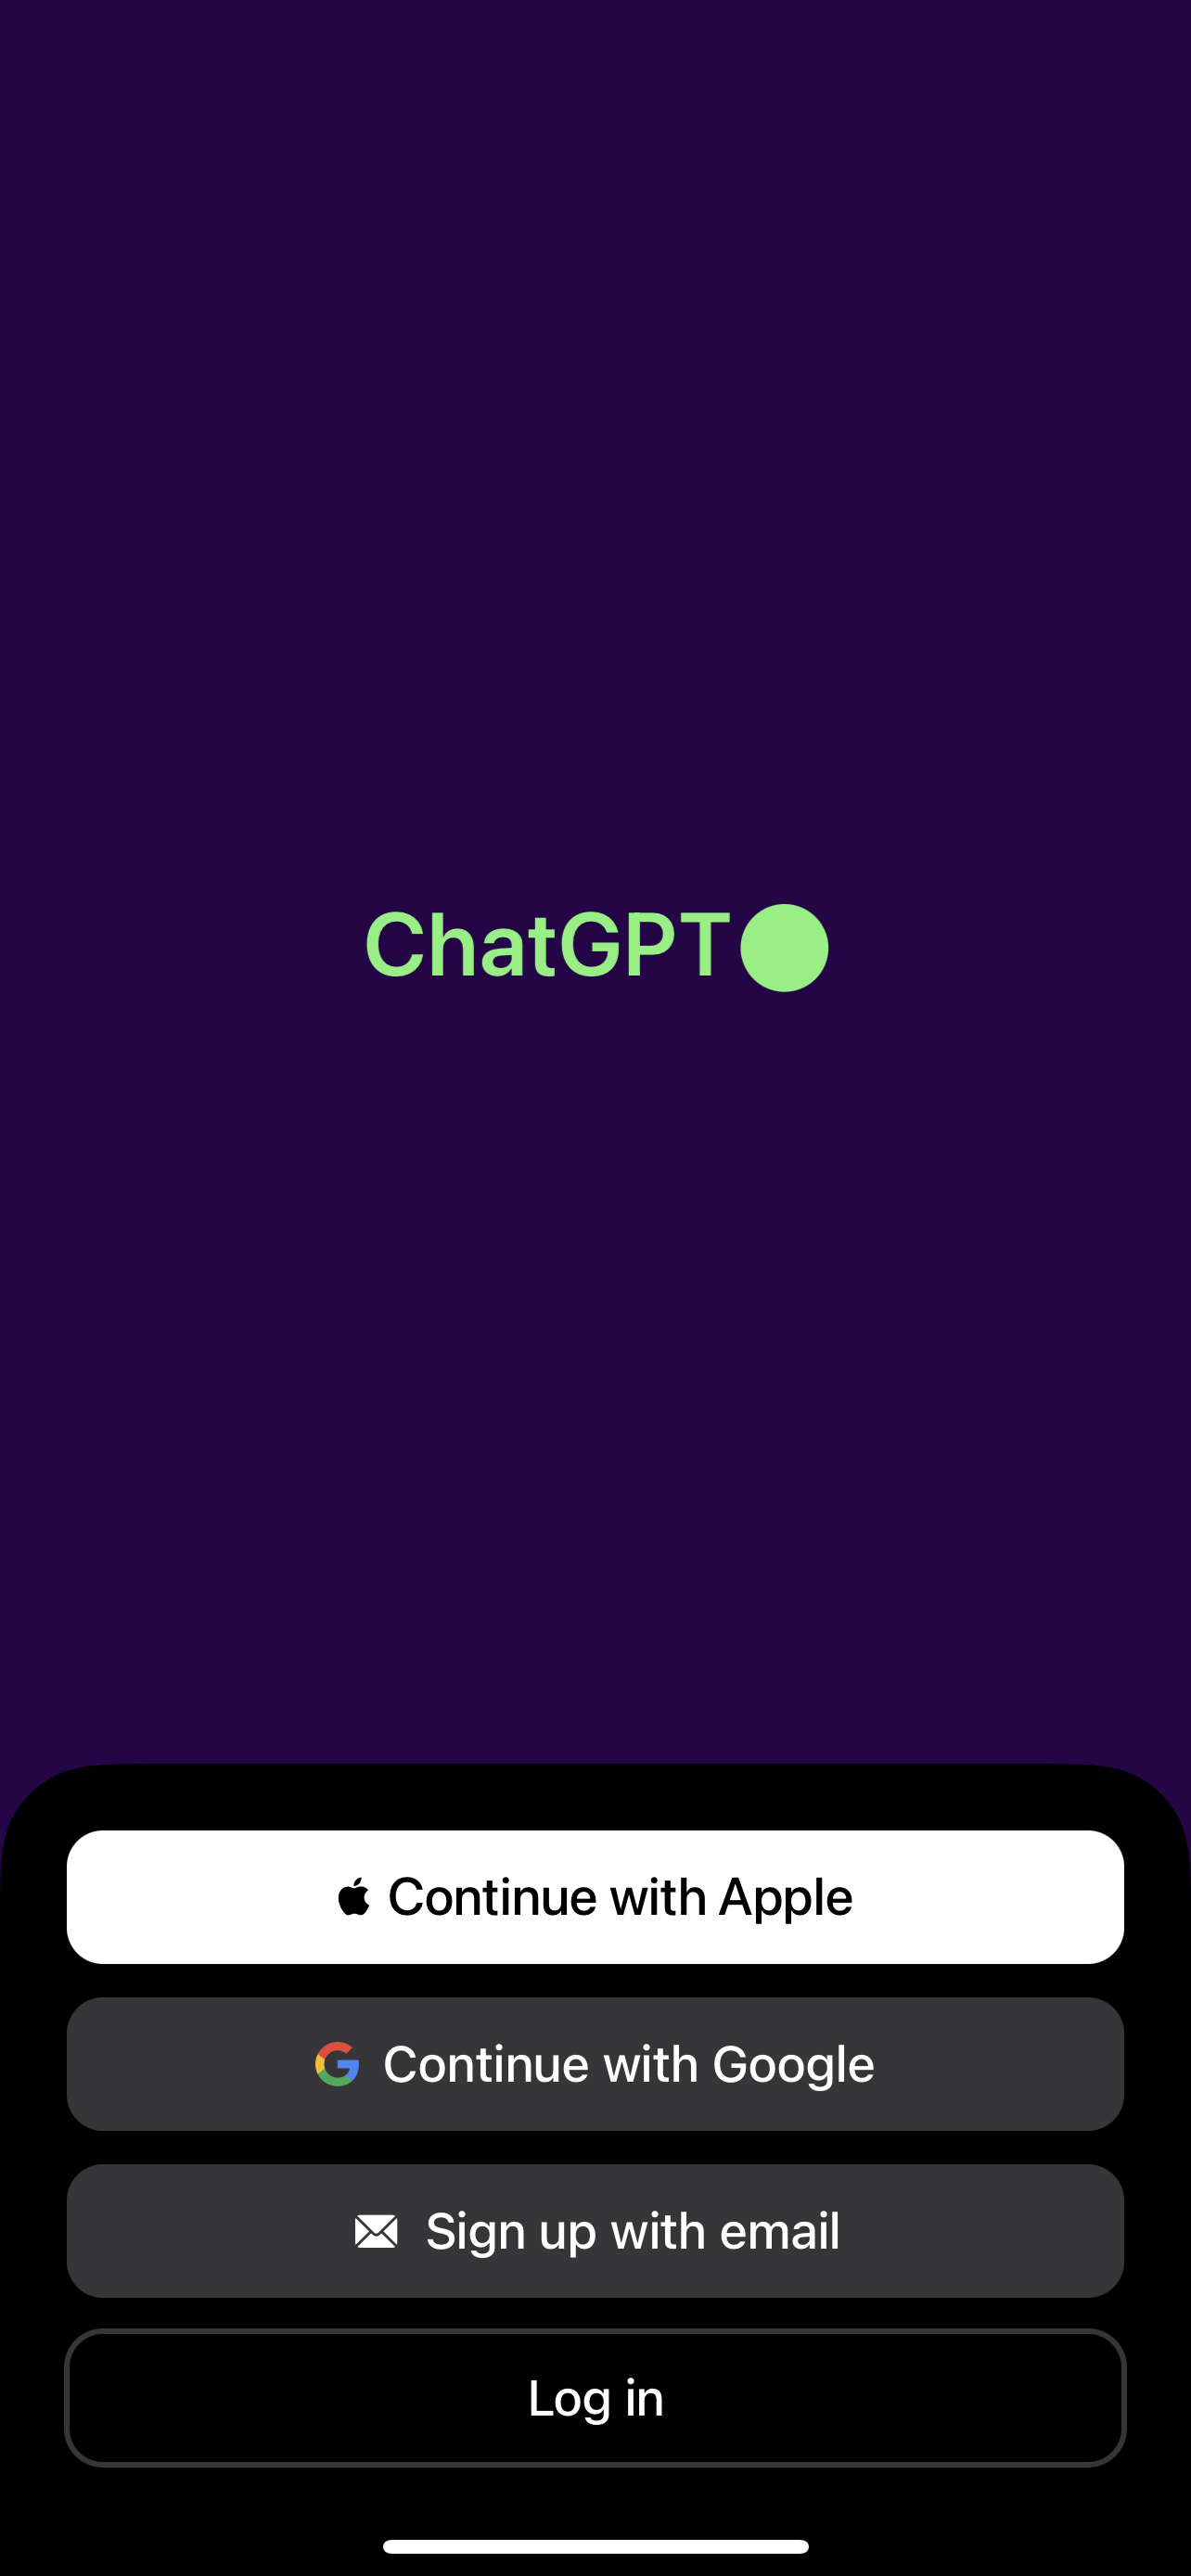 official openai chatgpt app ios iphone 2 646670b3ec45b sej - A Look Inside The New ChatGPT iPhone App From OpenAI